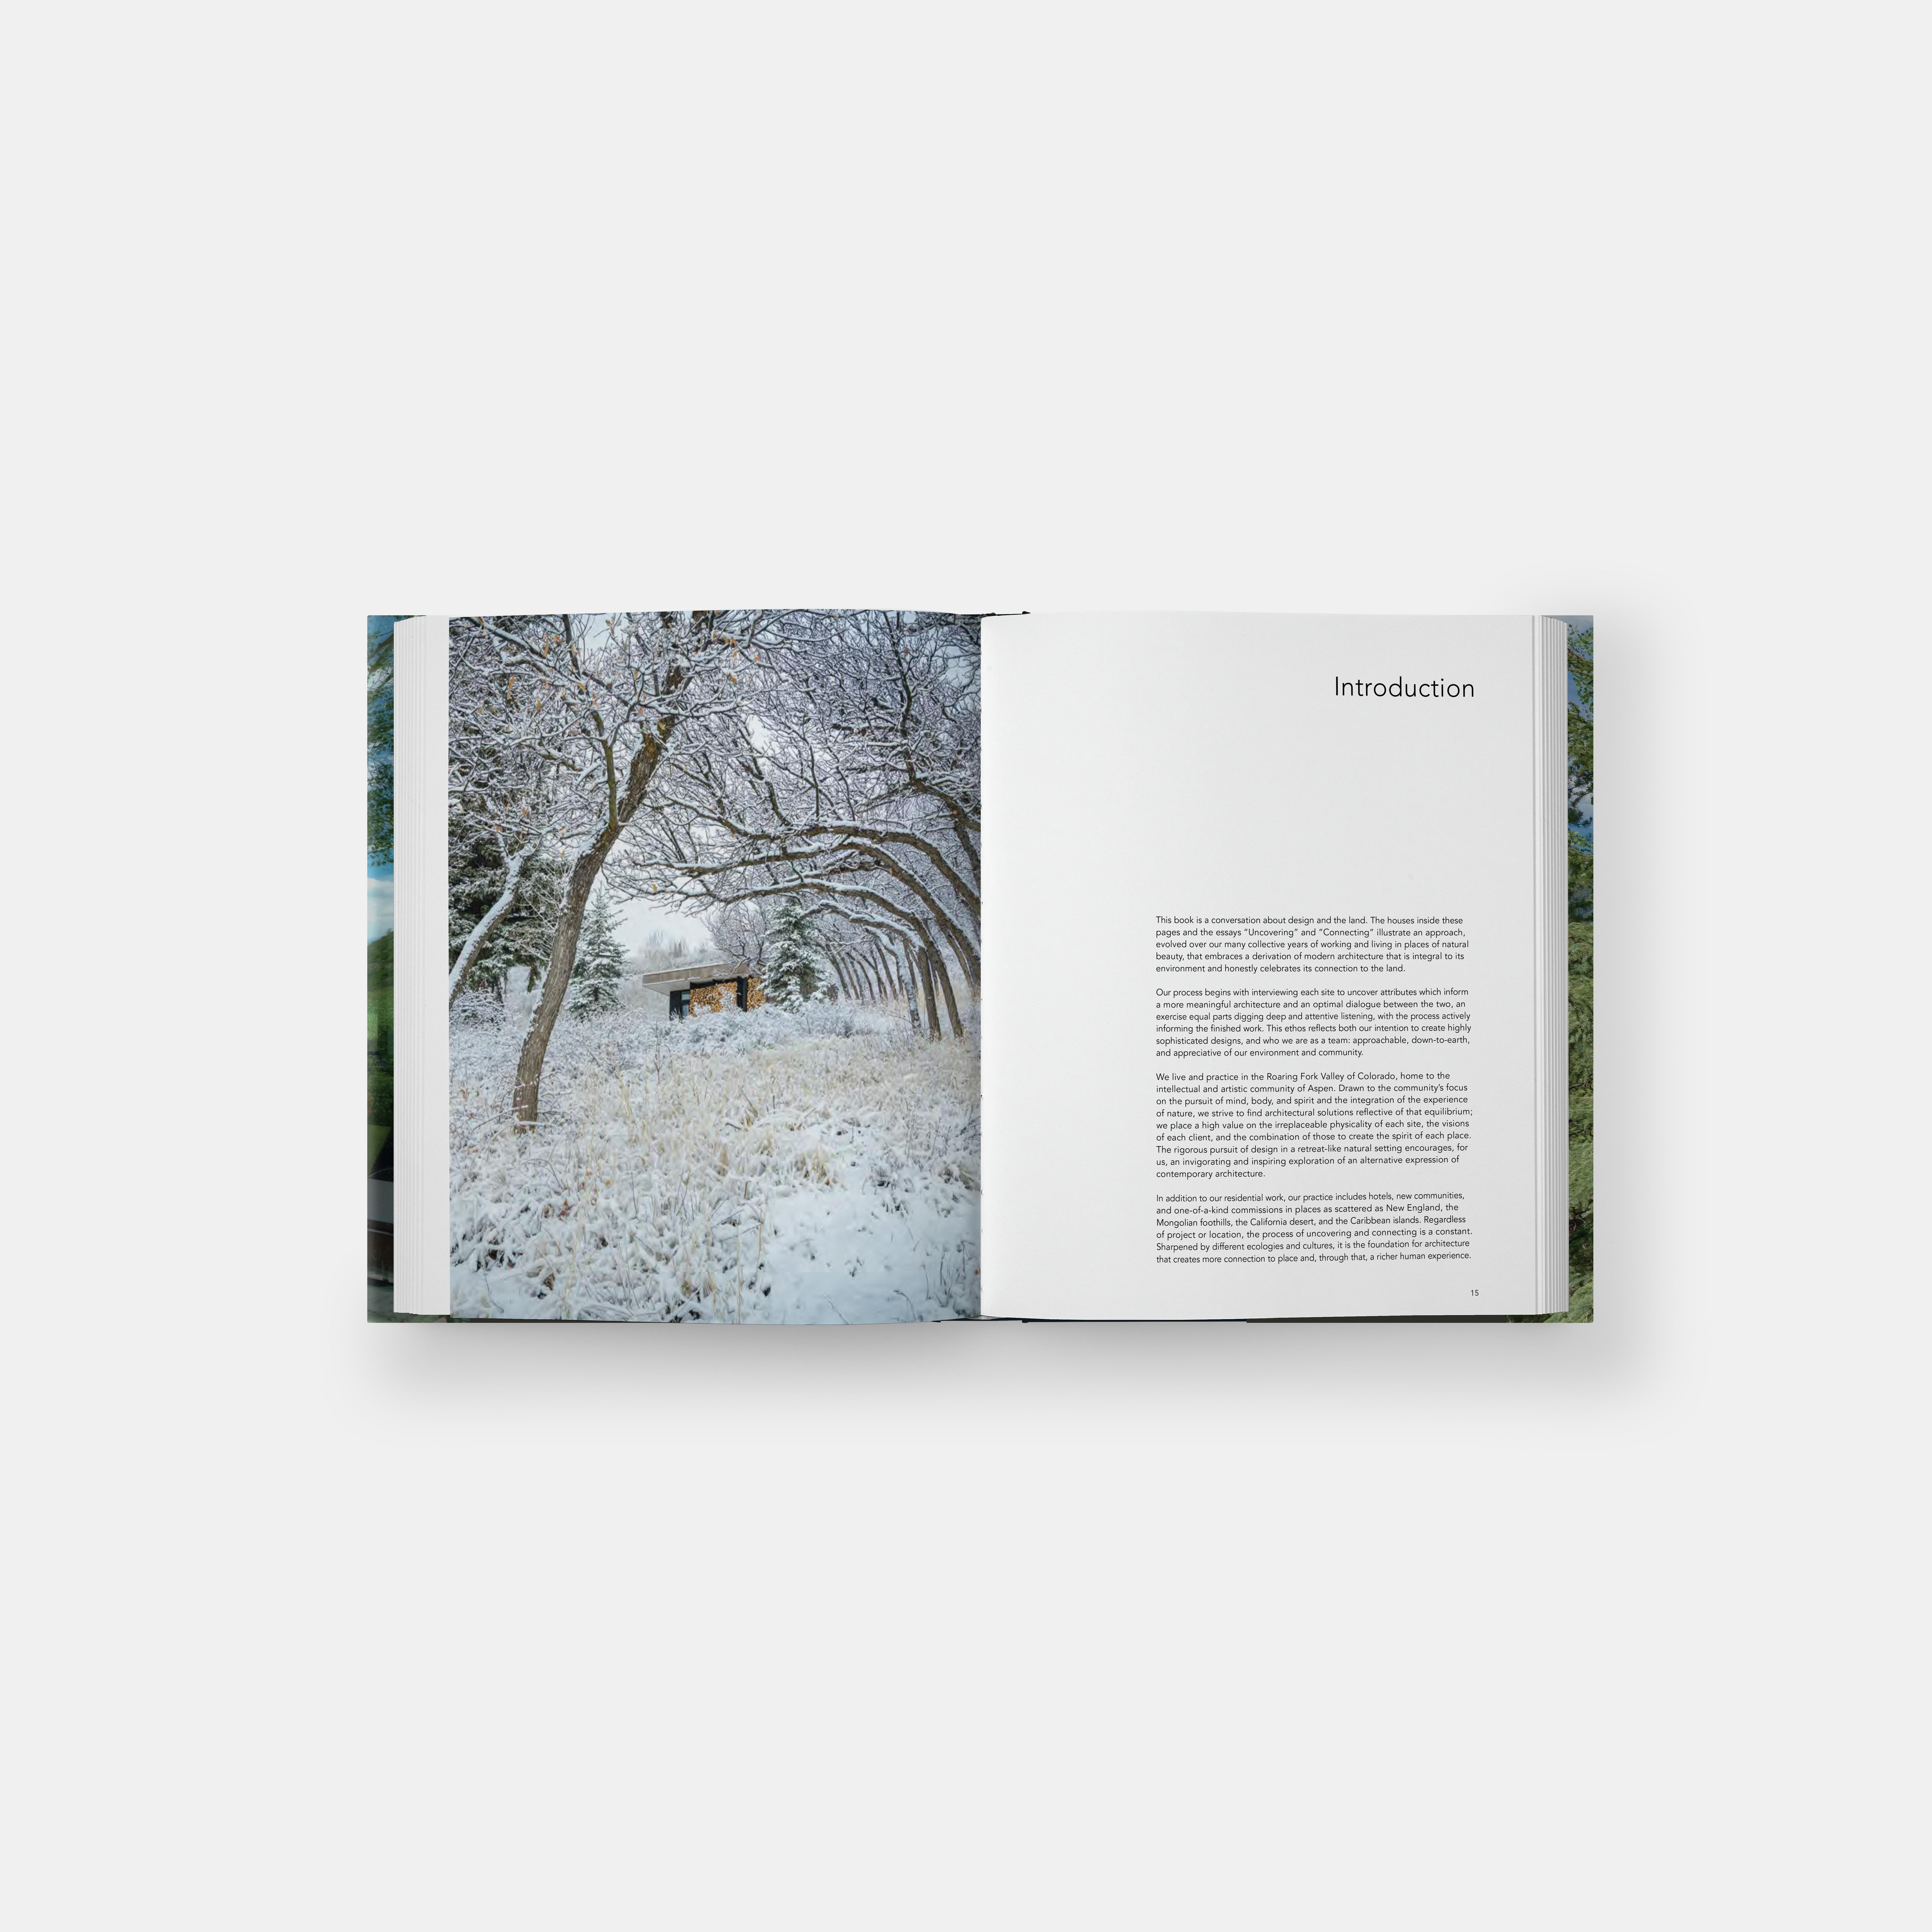 Connection is a monograph of ten residences that articulate the office's design process and exploration of creating architectural solution rooted in natural place.

Connection provides insight into how Colorado-based CCY Architects investigates